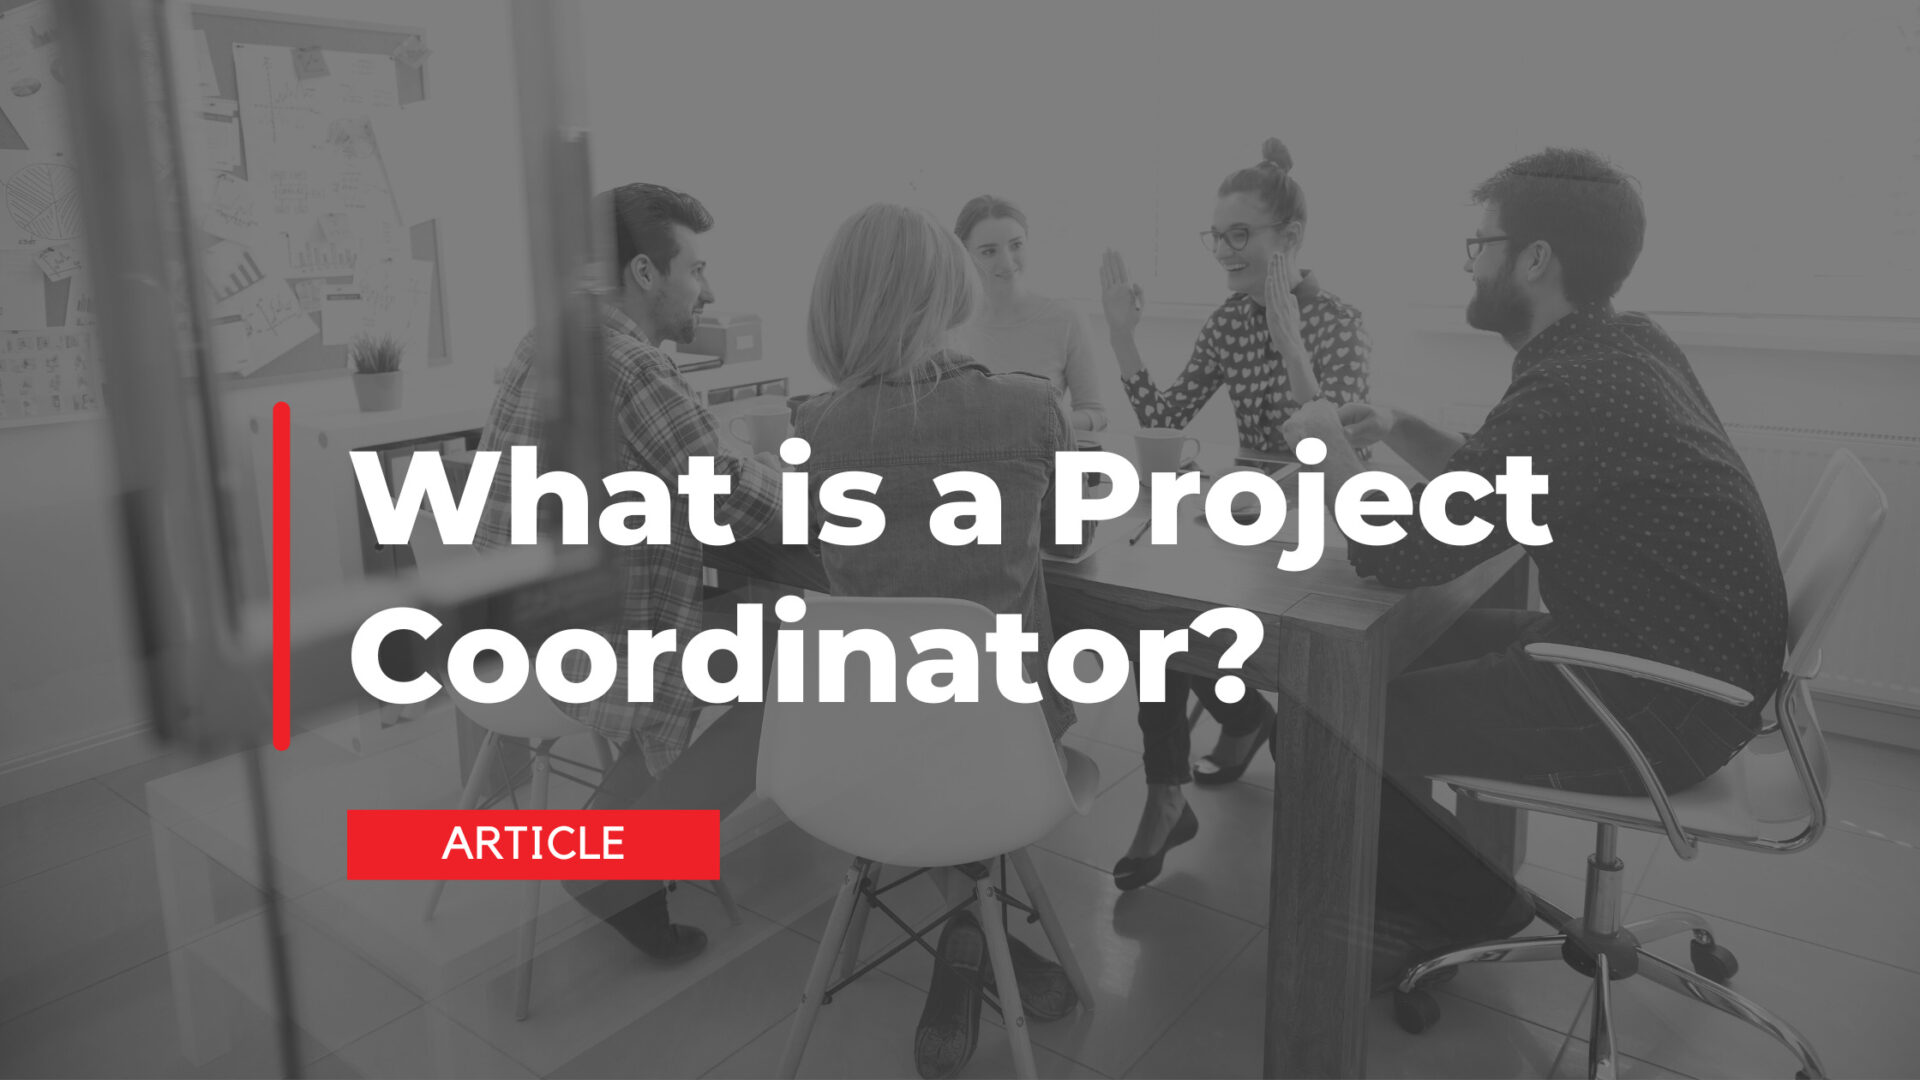 What is a Project Coordinator?